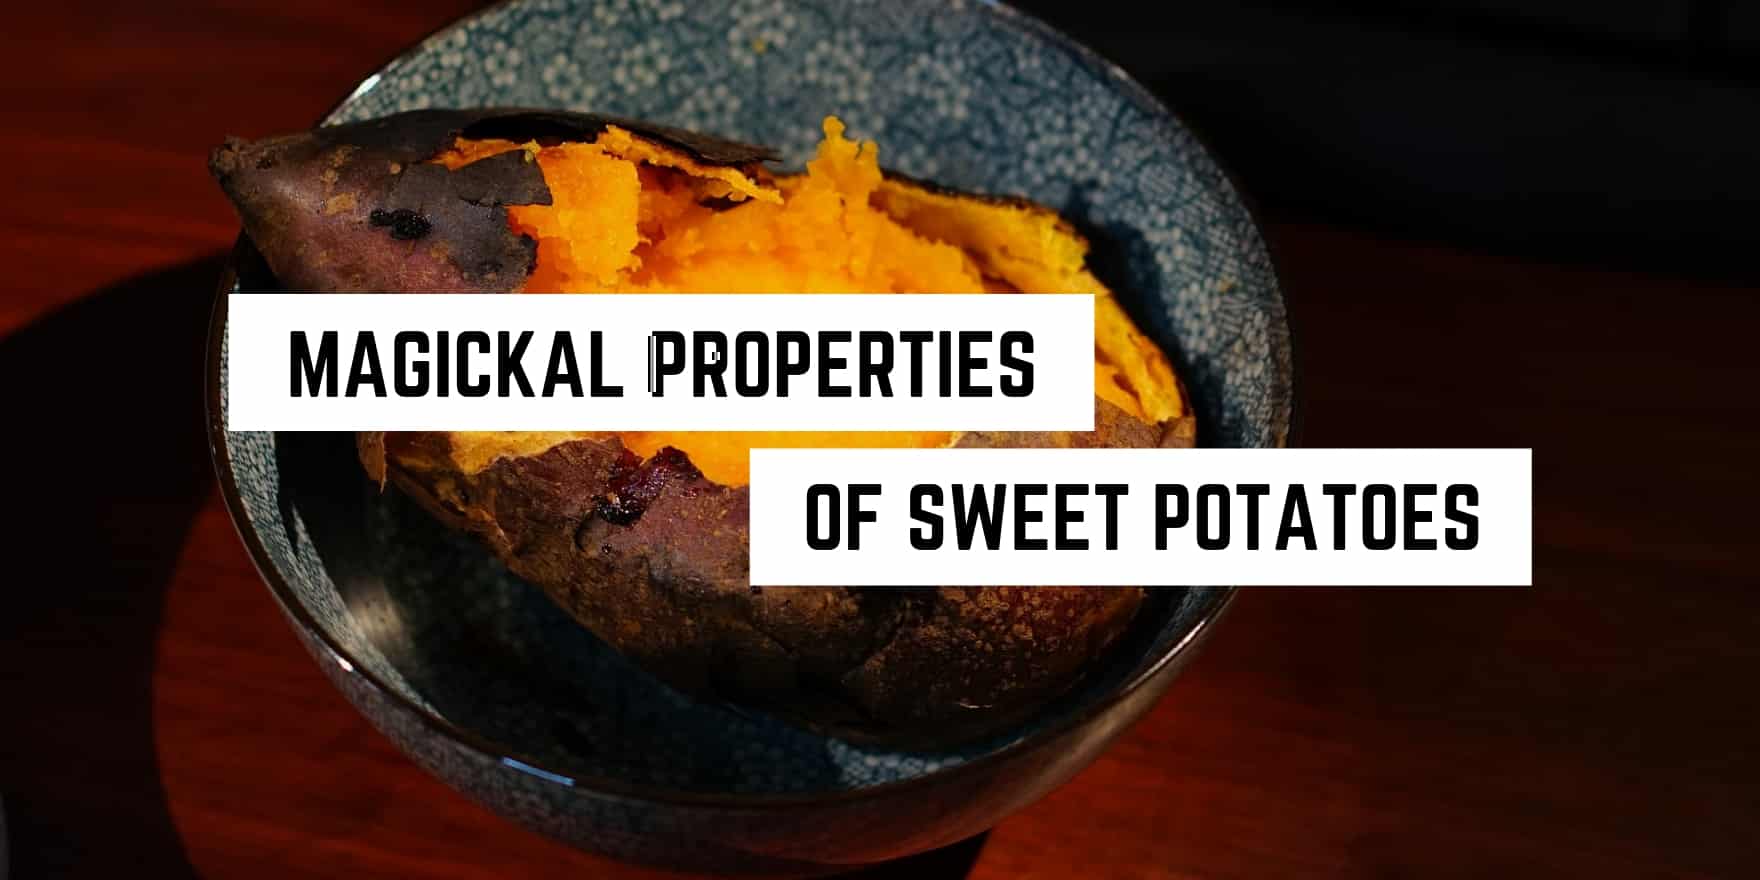 A baked sweet potato in a bowl with text overlay stating "metaphysical properties of sweet potatoes in the occult.